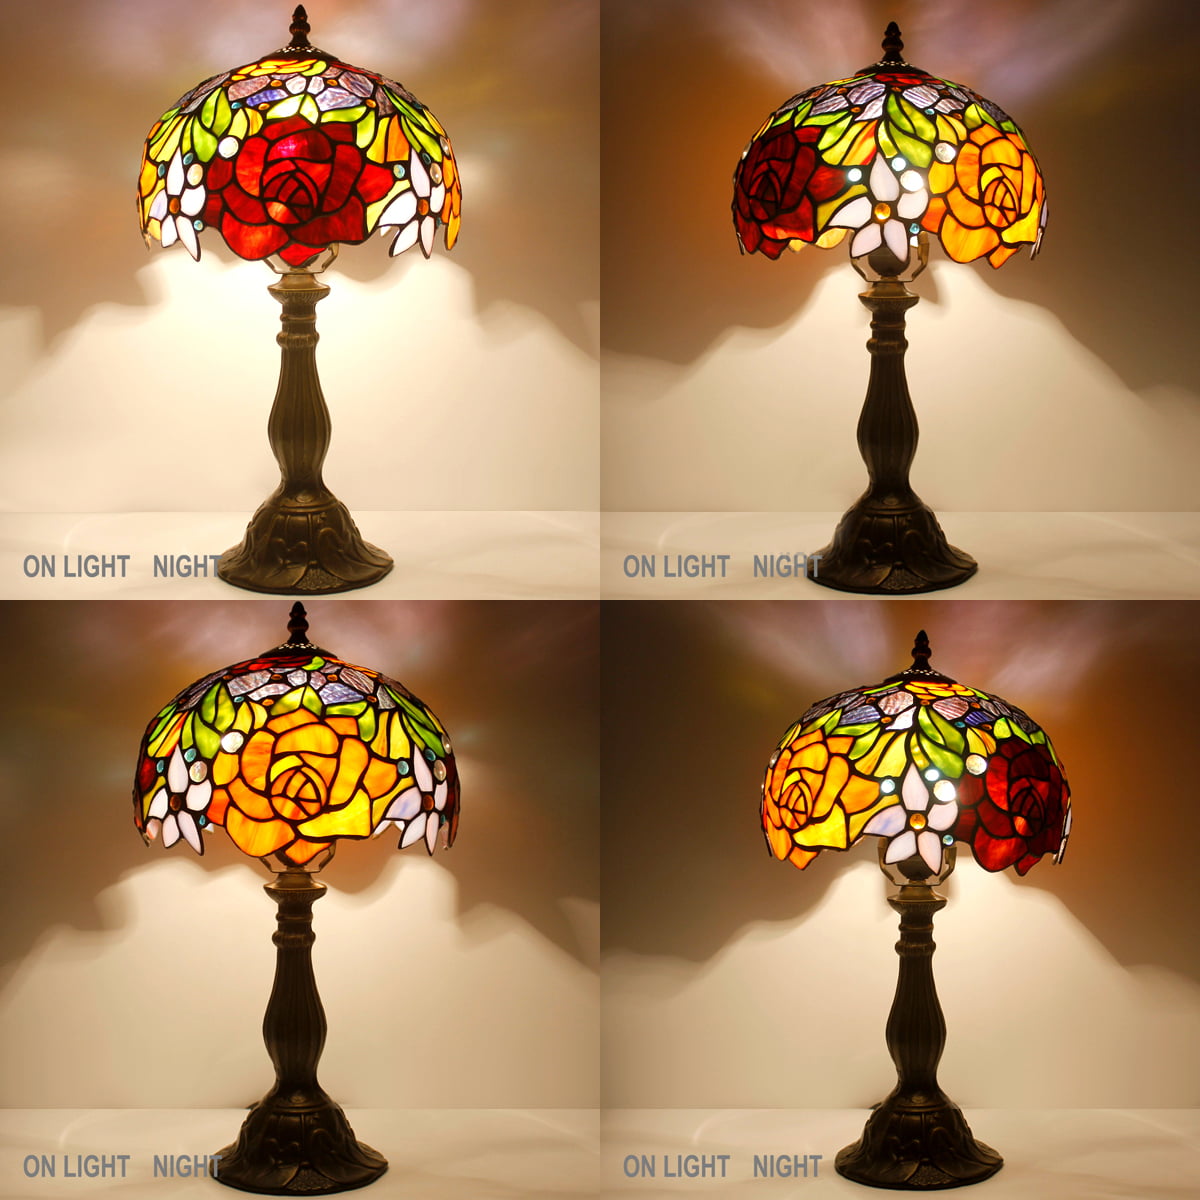  Style Table Lamp Bedside Stained Glass Lamp Red Rose Desk Reading Light 18" Tall Decorative Living Room Bedroom Vintage Library Banker Traditional Boho Victorian LED Bulb Included